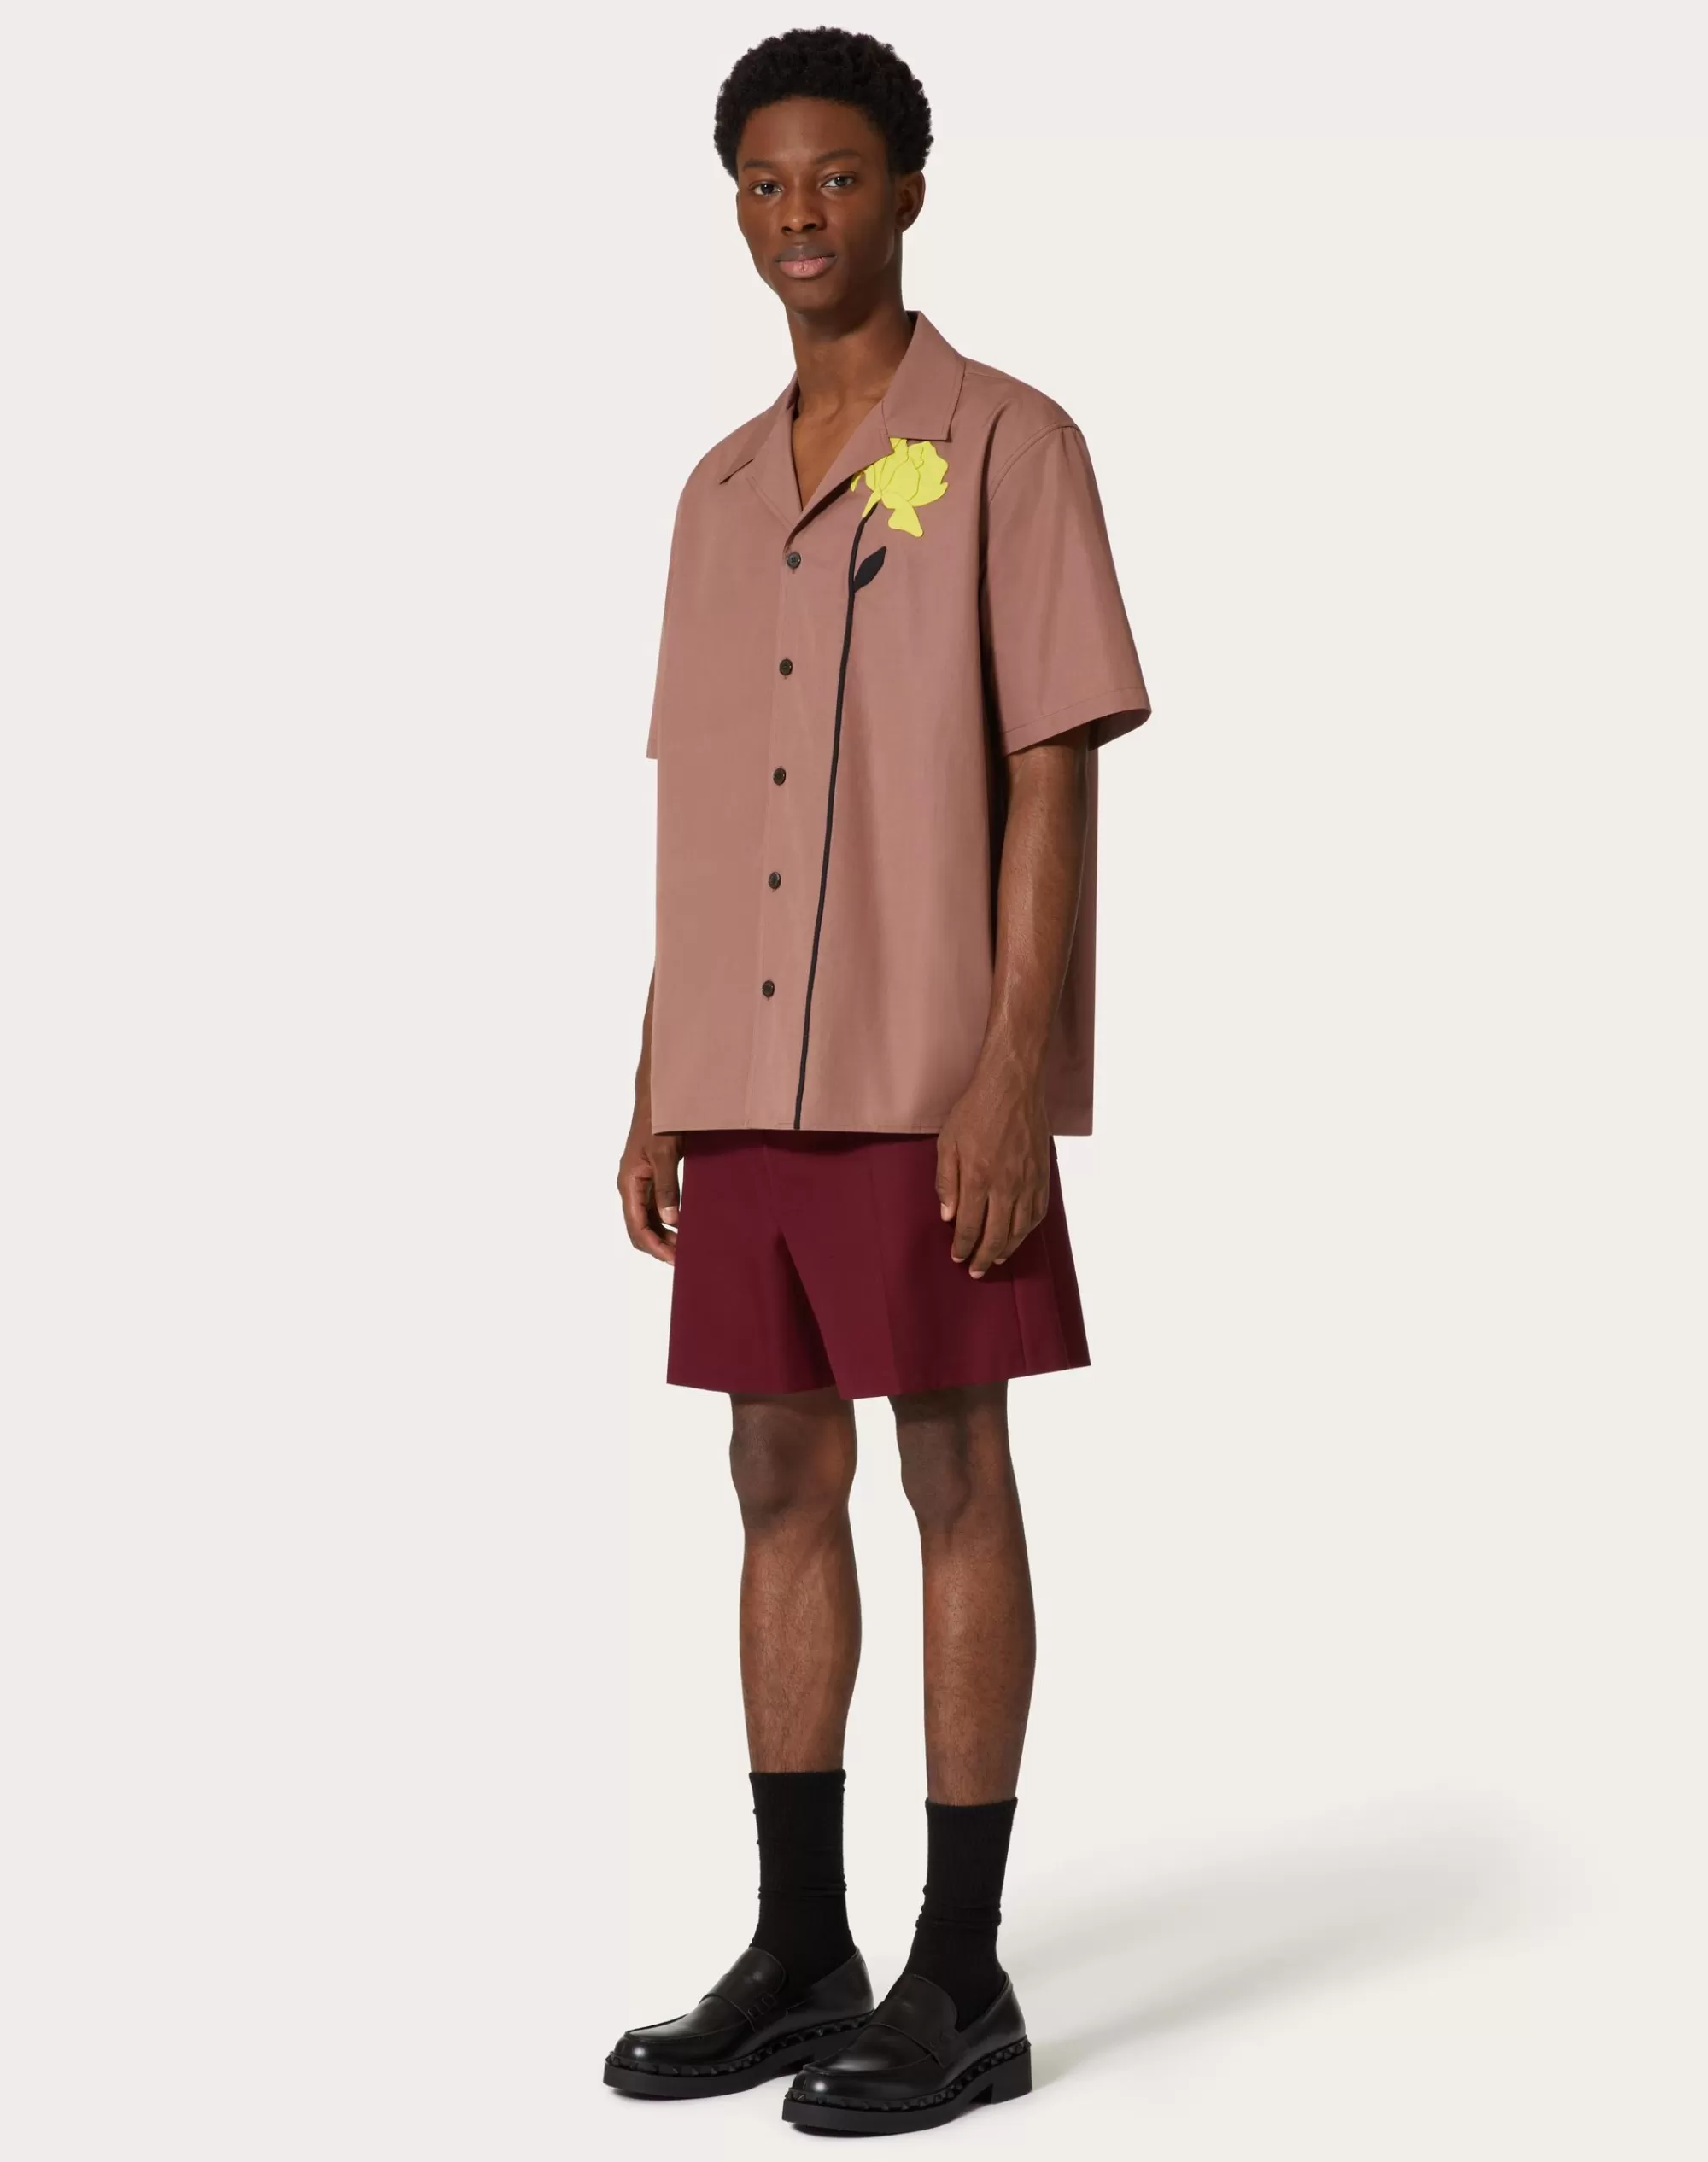 Valentino COTTON POPLIN BOWLING SHIRT WITH FLORAL CUT-OUT EMBROIDERY Mauve Hot